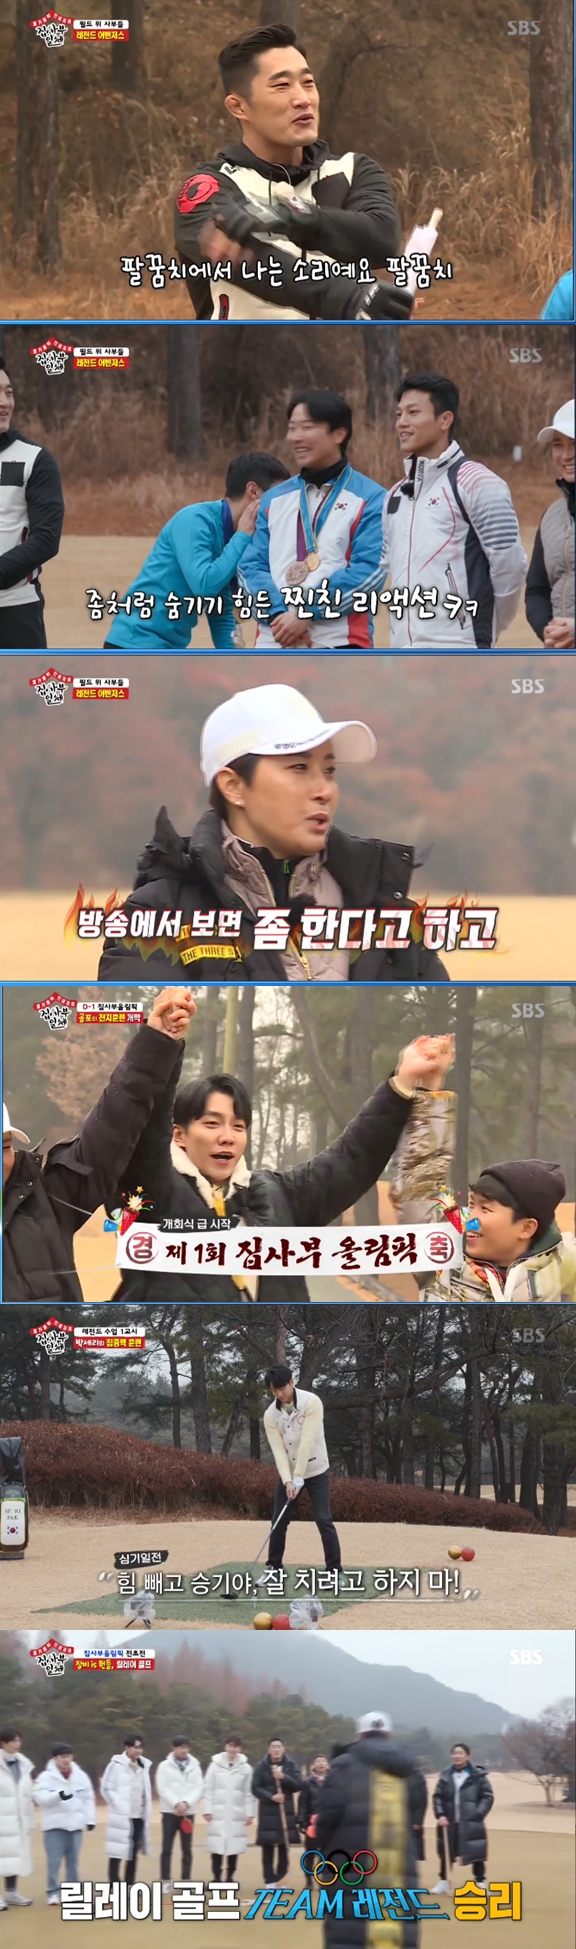 Sports Legends have shown a reputation worthy of their name.In the SBS entertainment program All The Butlers broadcasted on the night of the 26th, Pak Se-ri, Cho Jun-Ho, Choi Byung-chul, Kwak Yoon-gy and Kim Dong-Hyun came out as masters and spent a day with the members.Shin Sung-rok, who joined the team for the first time last week and opened with the existing members, could not hide his excited expression.Lee Sang-yoon said, It is better to line up one person while four people are Seo-yool Lee.Yook Sungjae also said, I dreamed of opening the five-year-old Lee on my way.As the atmosphere continued, the members began to watch each other when they saw the finish line prepared by the production team.The crew shot a gun when the members were seen, and Shin Sung-rok started to run.The members also ran, followed by Lee Seung-gi, Yang Se-hyeong and Shin Sung-rok.Once I ran, the members looked at each other with a puzzled expression without knowing the intention of the production team.Members saw the surroundings as Golf chapters and expected Master Golf to be Master this week; the crew hinted that Todays Master is the Olympian Games hero.With the members unable to catch the impression, this weeks masters, Pak Se-ri, Cho Jun-Ho, Choi Byung-chul, Kwak Yoon-gy and Kim Dong-Hyun, walked out.The Pak Se-ri came out with a trophy that he had lifted during the 1997 U.S. Open win; the members were surprised to see the actual trophy.The trophy was won by Pak Se-ri with a barefoot tug; the members touched the trophy themselves and gave Pak Se-ri a look of respect.Lee Seung-gi asked, Why is our woman Golf doing well?Cho Jun-Ho surprised everyone by saying, There is a research paper that says that Koreas female Golf is strong thanks to Pak Se-ri.Lee Seung-gi acknowledged that Pak Se-ri is a legend, saying, Pak Se-ri is still and tells stories around.Kim Dong-Hyun said, There has never been such a person before, he said when introducing himself. Is it a martial arts player or an entertainer?I introduced it as active duty until last year, but I have retired from this year for a long time since I did not play Kyonggi, he added.However, Kwak Yoon-gy, who was next to him, said, I have a UFC contract period left, and Kim Dong-Hyun laughed, saying, The representative should not see this broadcast.Kwak Yoon-gy then introduced himself and said he was still active.So when Pak Se-ri said, I have been on the air a lot, he said, It comes out when I get out of time.Kwak Yoon-gy continued to show good dedication, and Yook Sungjae warned that it is like Yang Se-hyeong there.When the masters introduction was over, Lee Seung-gi asked, What are you going to do?Pak Se-ri said, I do not know, he said, I am strong in size, but I do not have to do anything.The production team said, Tomorrow, we will open All The Butlers Olympic Games.When Kim Dong-Hyun heard that he was an Olympic Games, he said, I have never participated in Olympic Games. He said, I will be desperately working.Members also showed their passion for the Olympic Games when they saw the medal, the winning prize; the members were given The Lesson by the legendary masters before the Olympic Games.The first was hosted by Golf legend Pak Se-ri, who showed a perfect swing even though he had been in front of the members for a long time.Lee Seung-gi has been learning Golf for six months, said Yang Se-hyeong, who watched Pak Se-ris swing demonstration.Pak Se-ri suggested Lee Seung-gi give it a try, and Lee Seung-gi climbed up the round in a tense state.But Lee Seung-gi unexpectedly showed the perfect shot, and Pak Se-ri also applauded his swing.Pak Se-ri said Golf is a sport that needs more concentration than any other sport; she gave the members admiration by saying Golf is saving the dead ball.The members of the Golf novice, except Lee Seung-gi, did not know much about Golf, but applauded and cheered whenever Pak Se-ri swung.Pak Se-ri also responded with a feat of matching the flagpole to the cheers of the members; she set the flagpole and said, Im afraid Ill play again, laughing.After seeing the demonstration of Pak Se-ri, the members played Golf Konggi with an adventure at the Legend team and the Olympic Games to be held the next day.The crew handed the members fly, spatula, baseball bat, and perforated rice instead of golf. Lee Seung-gi and Kim Dong-Hyun raised tension by spreading nervous battles with each other.After a fierce showdown, Kim Dong-Hyun put the ball into the hole and the Legend team won and took advantage.